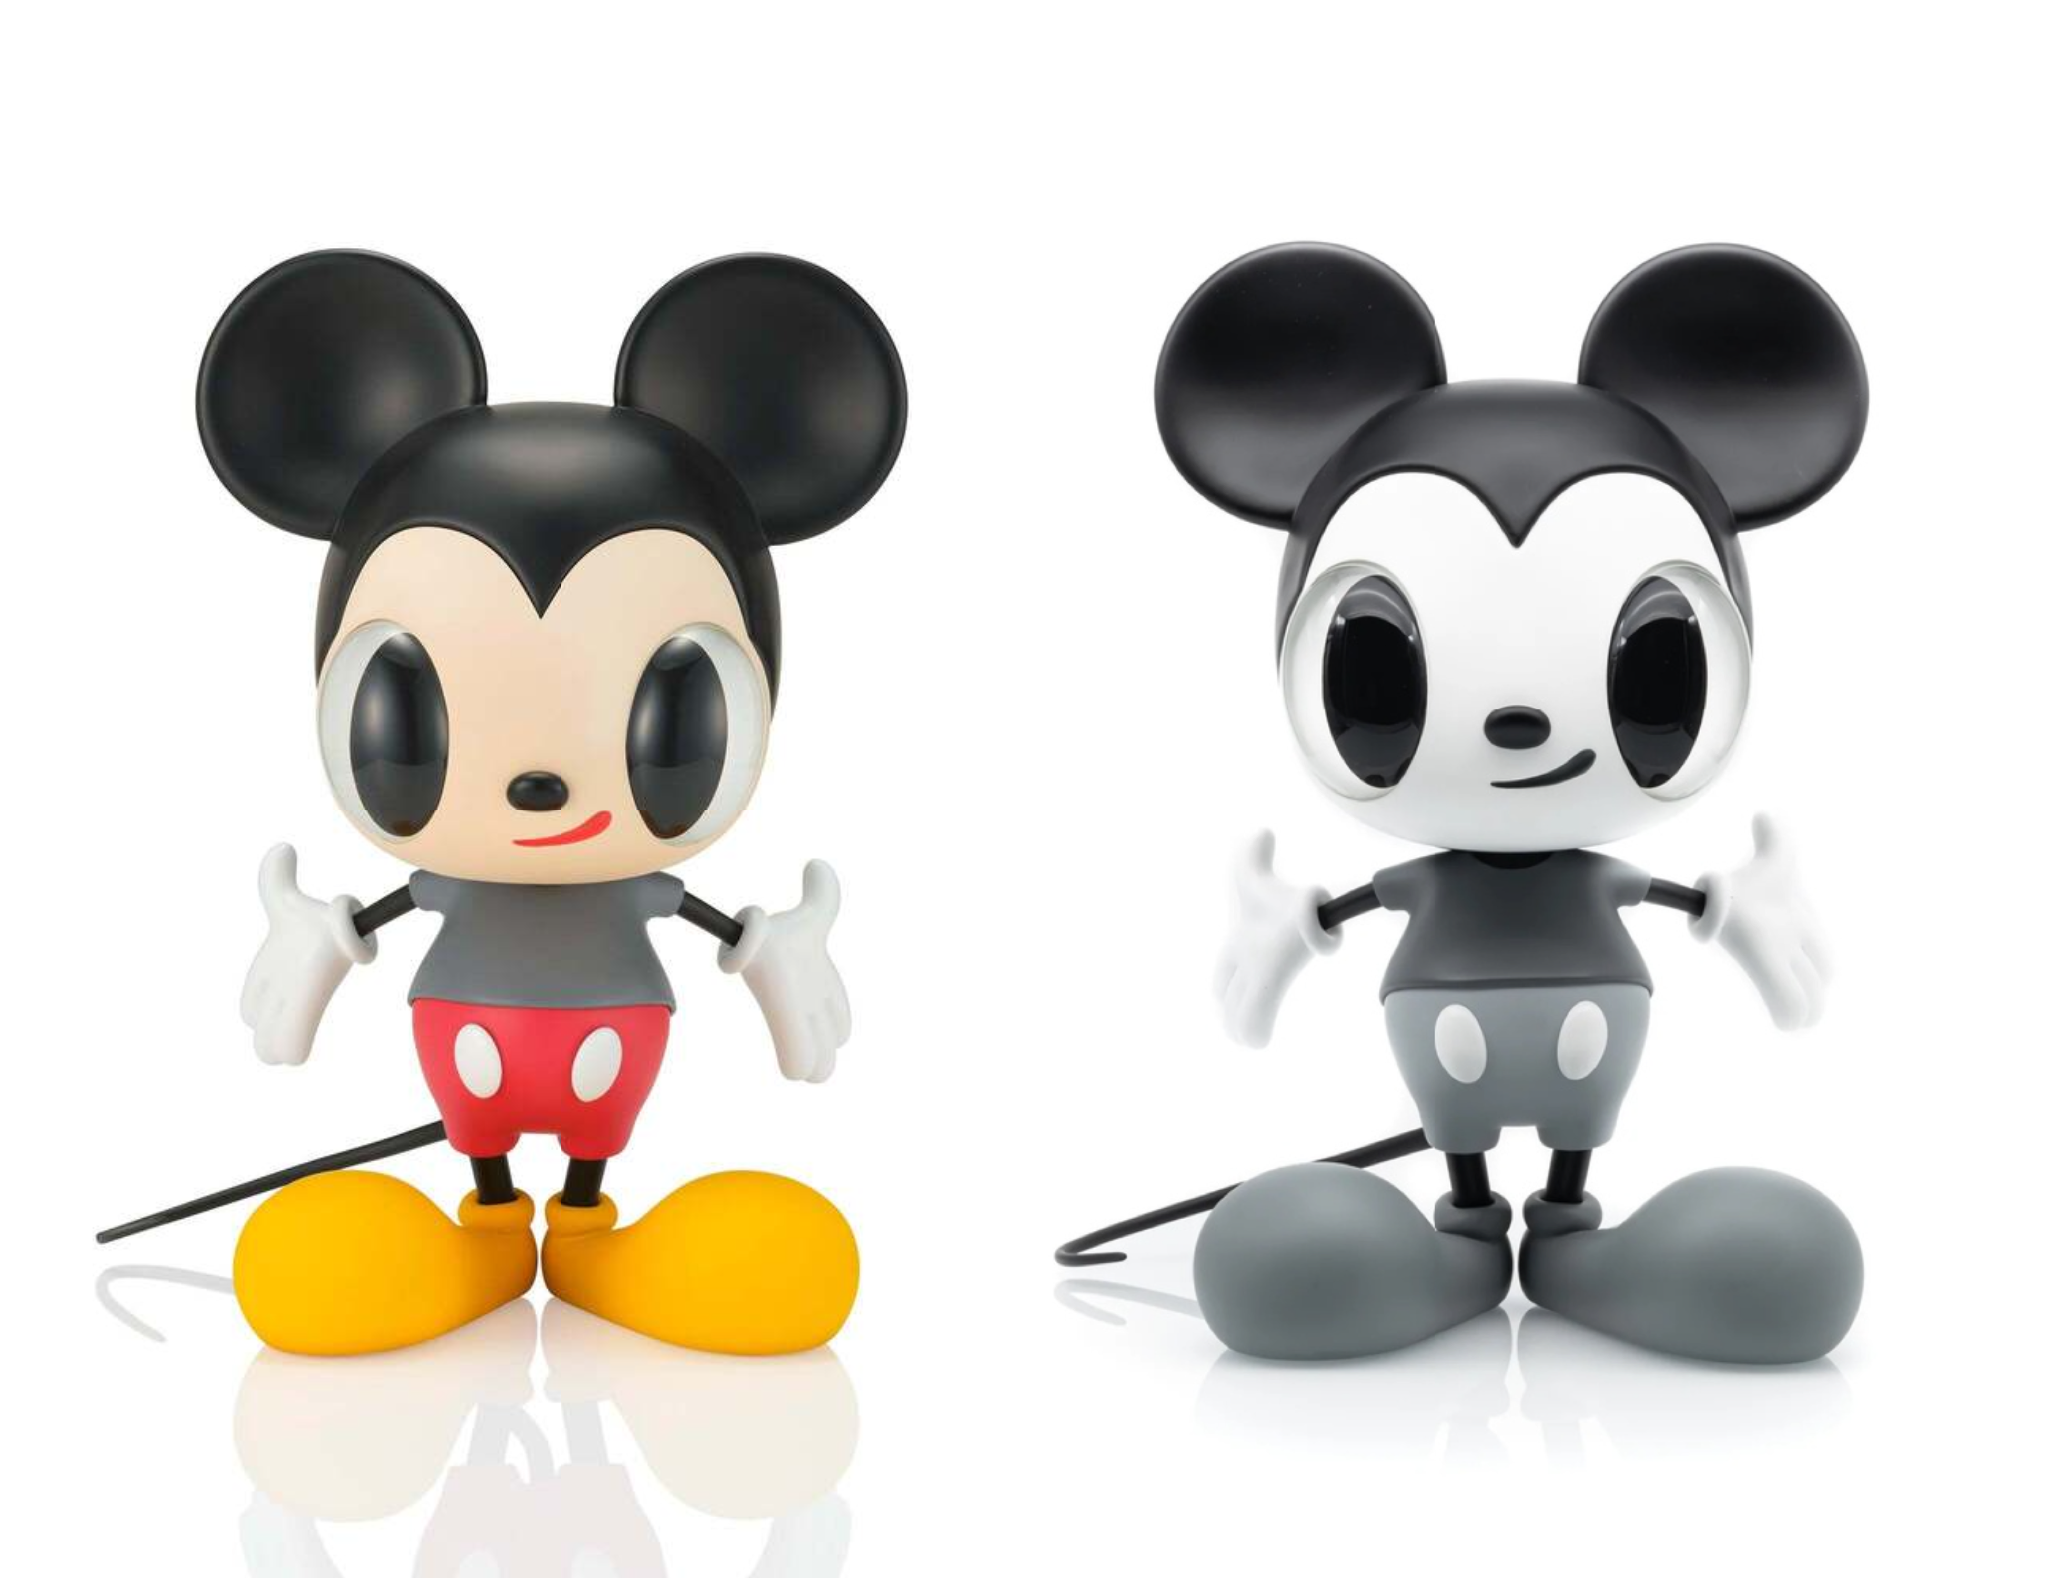 MickeyMouse Now and Future EditionSofubi